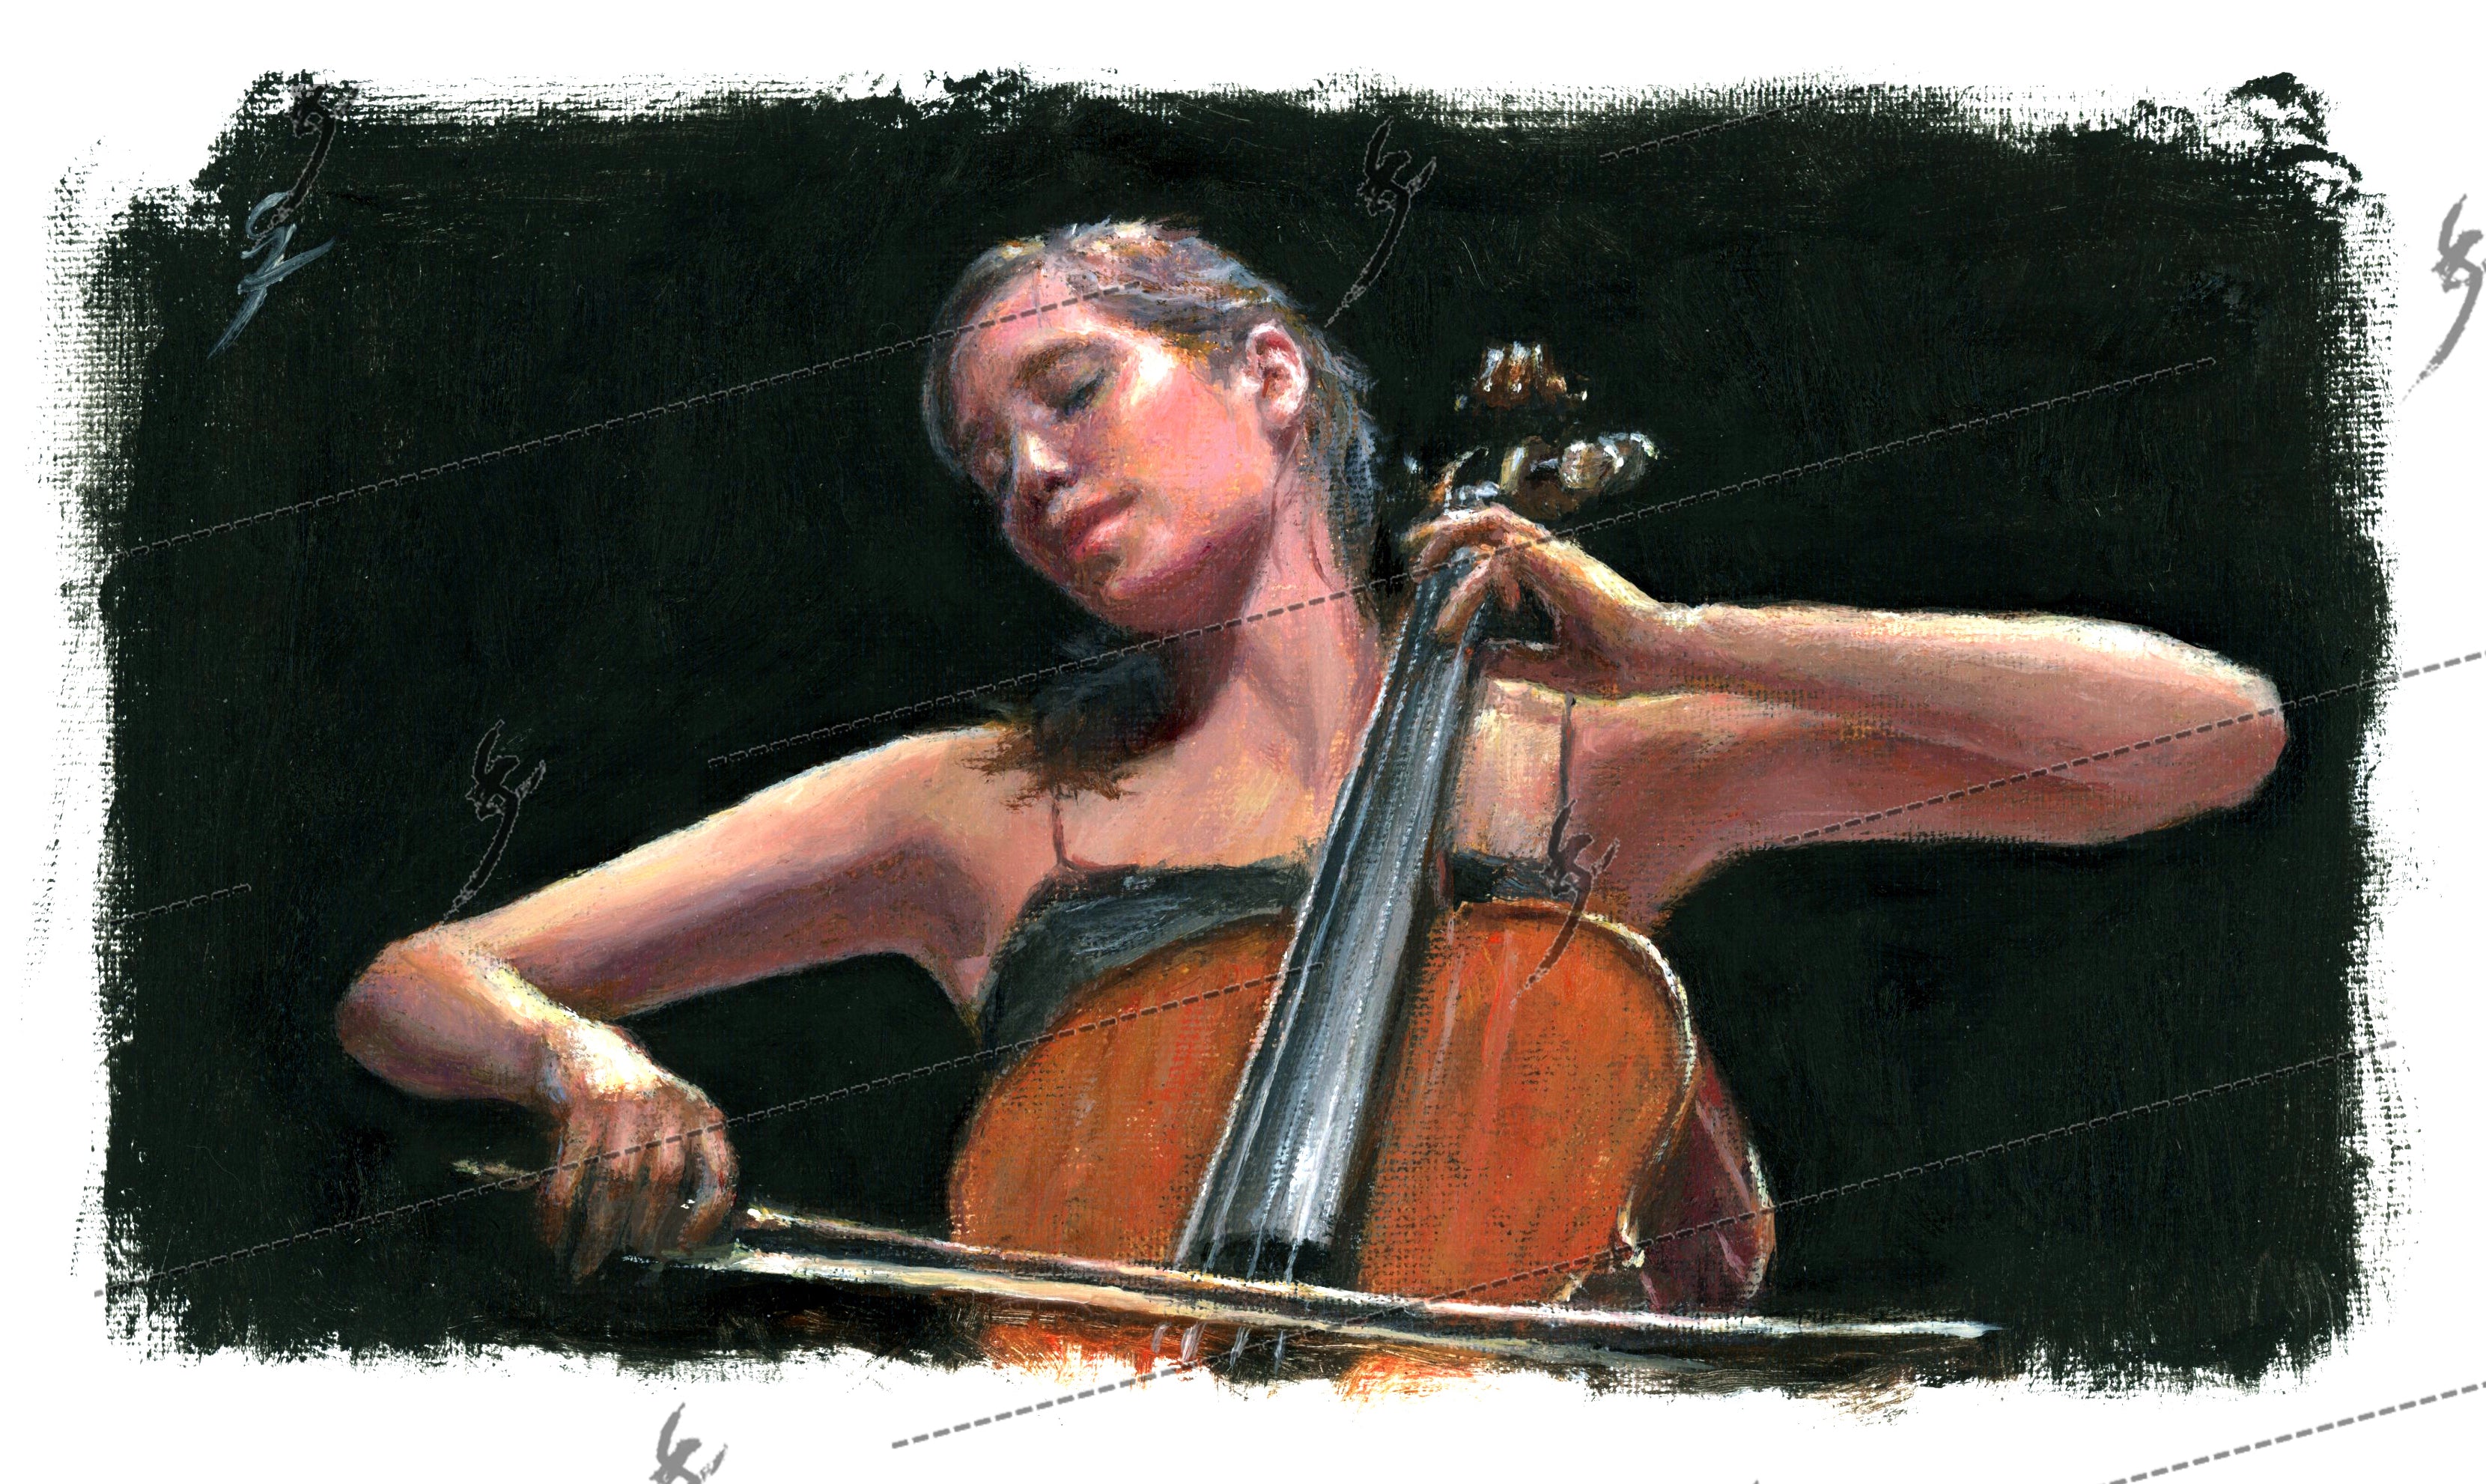 "Soliste" painting of a cello player. Bubble-free stickers